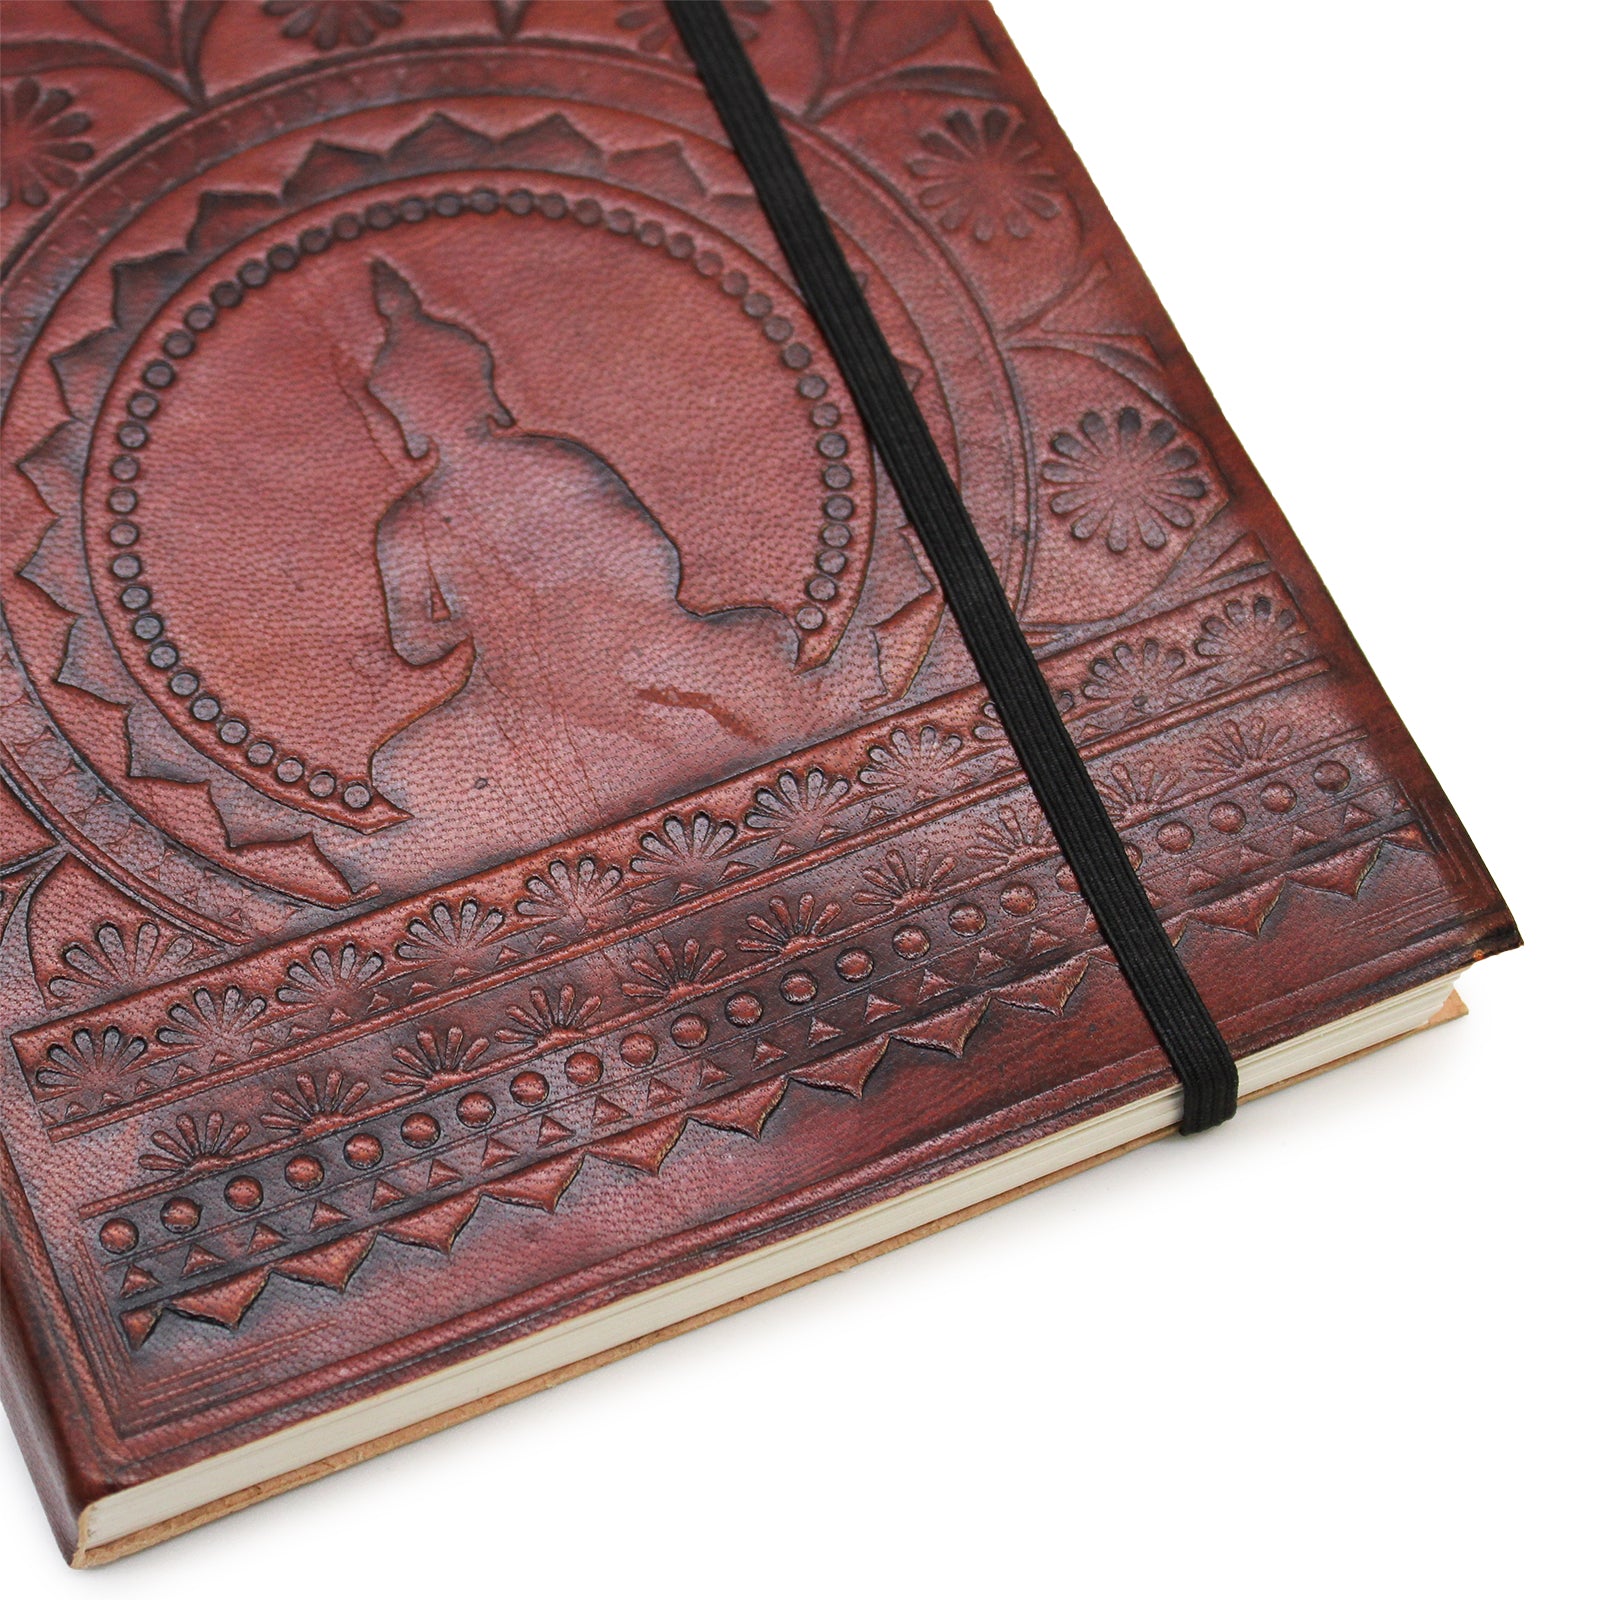 Small Leather Notebook with Strap - Tibetan Mandala